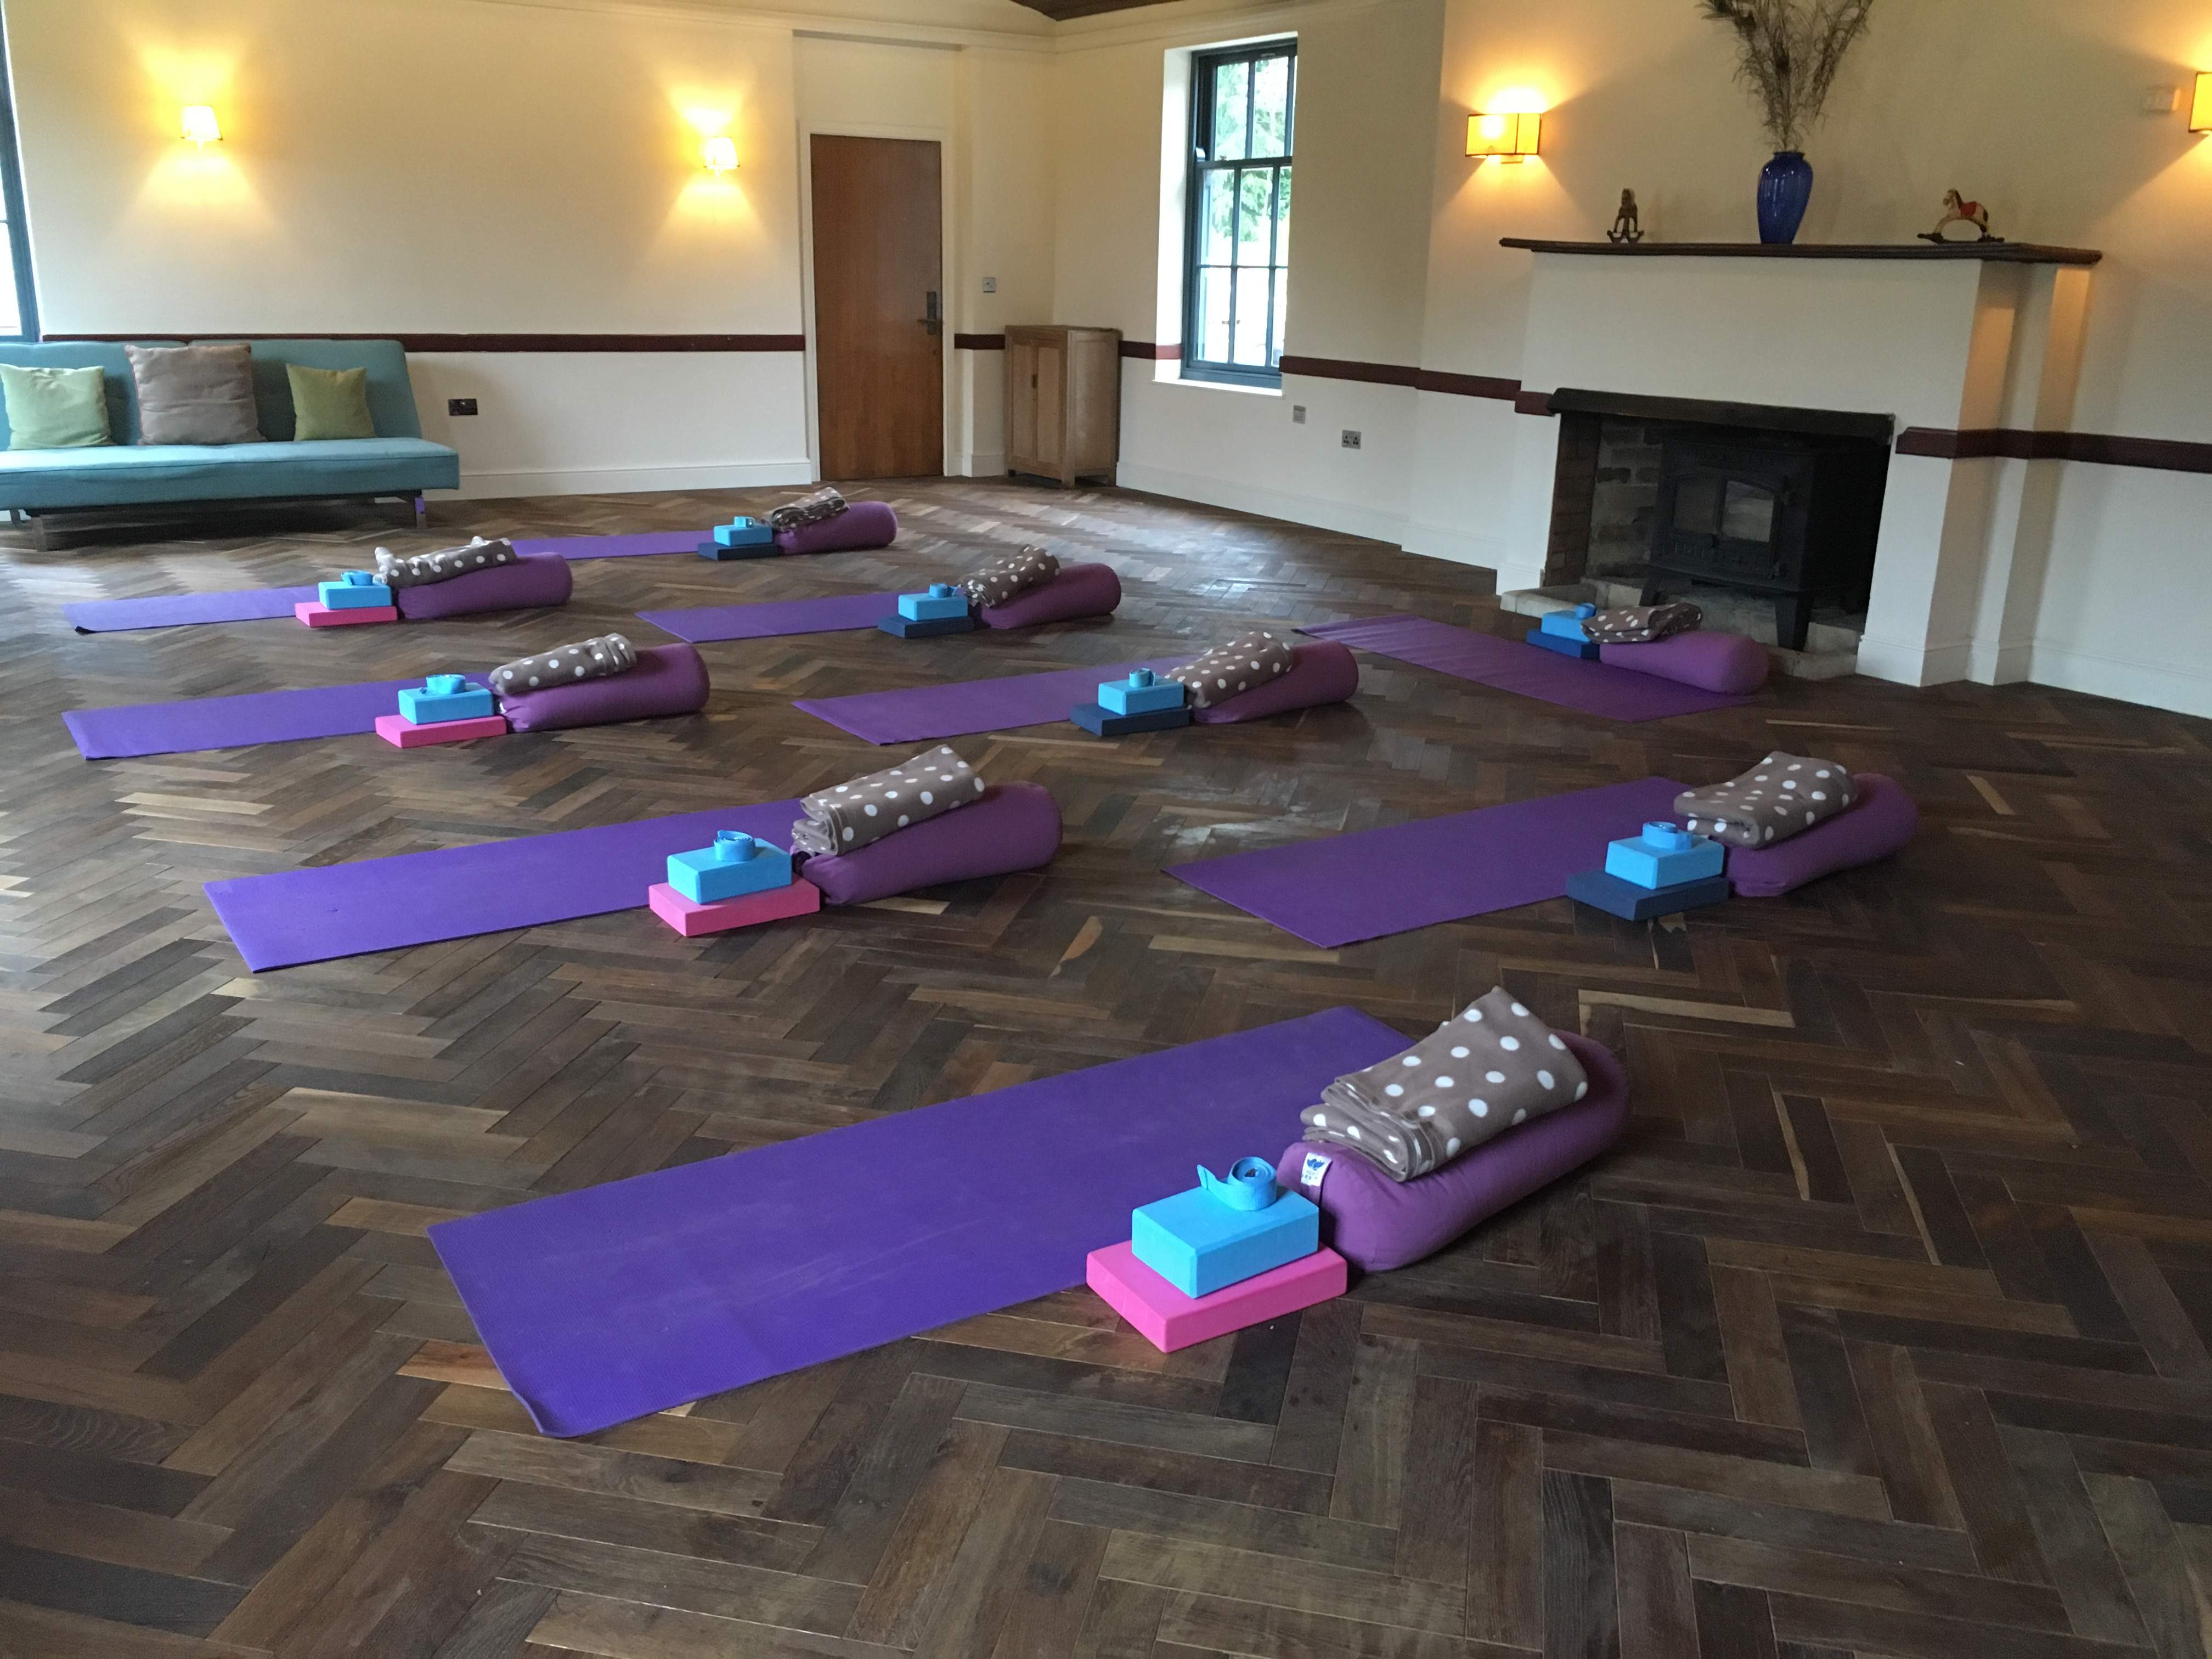 Yoga Mind Balance offers beautiful relaxing retreats in Norfolk and in the UK.